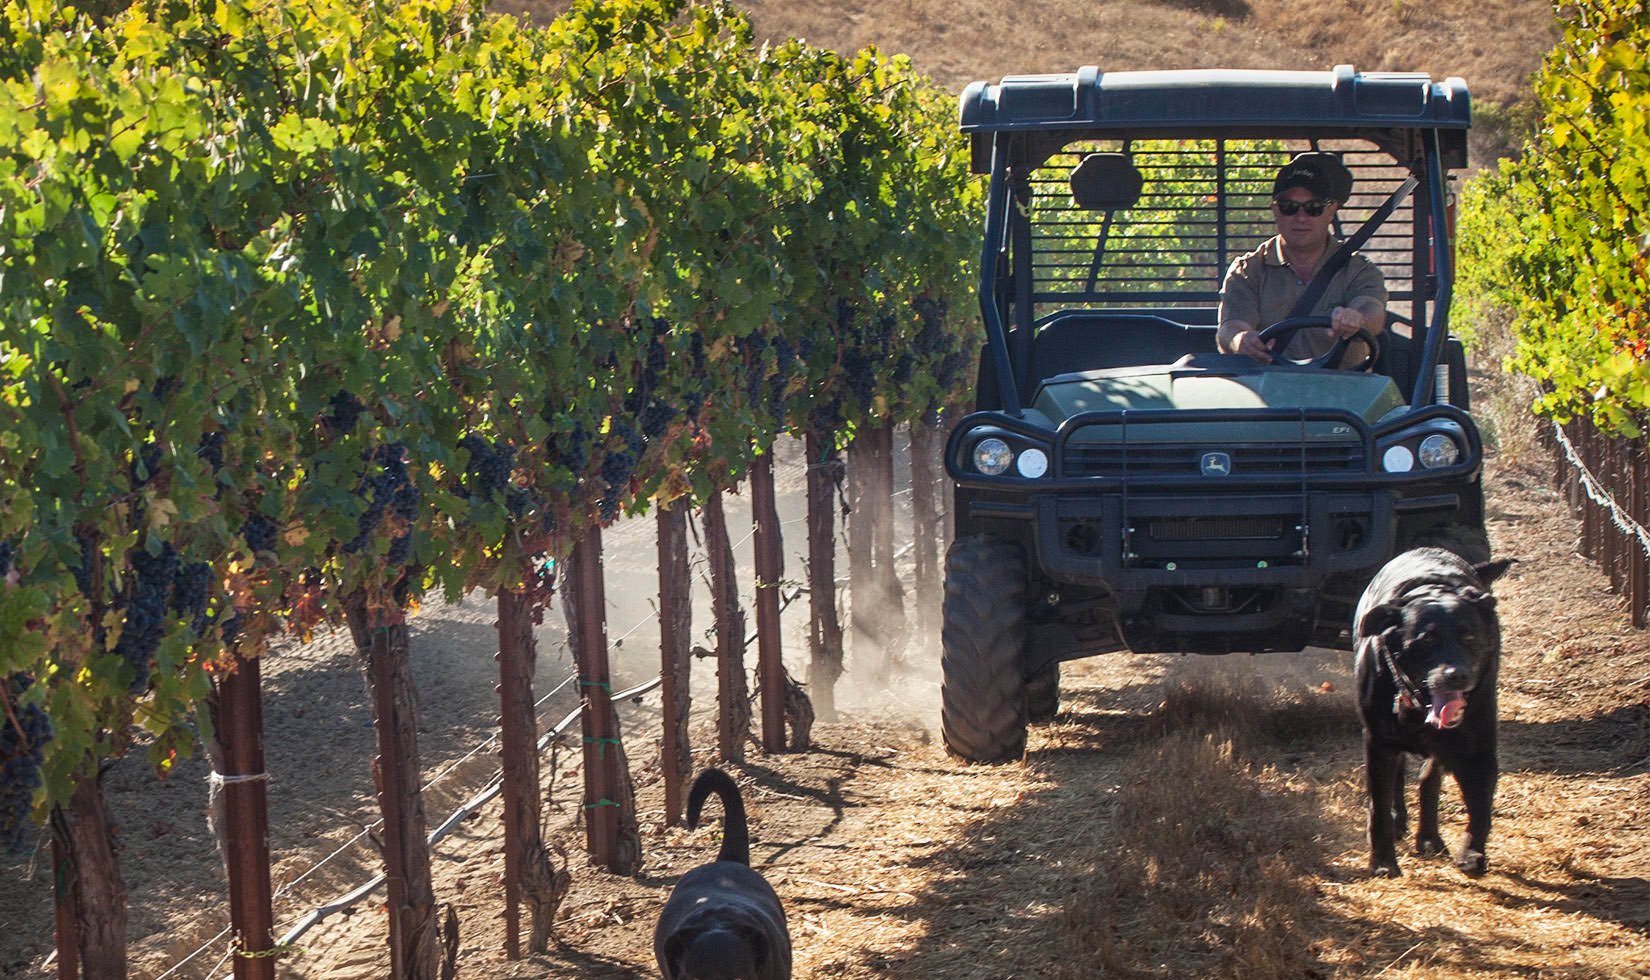 John Jordan, CEO and proprietor of Jordan Winery in an ATV driving through a vineyard with two of his dogs